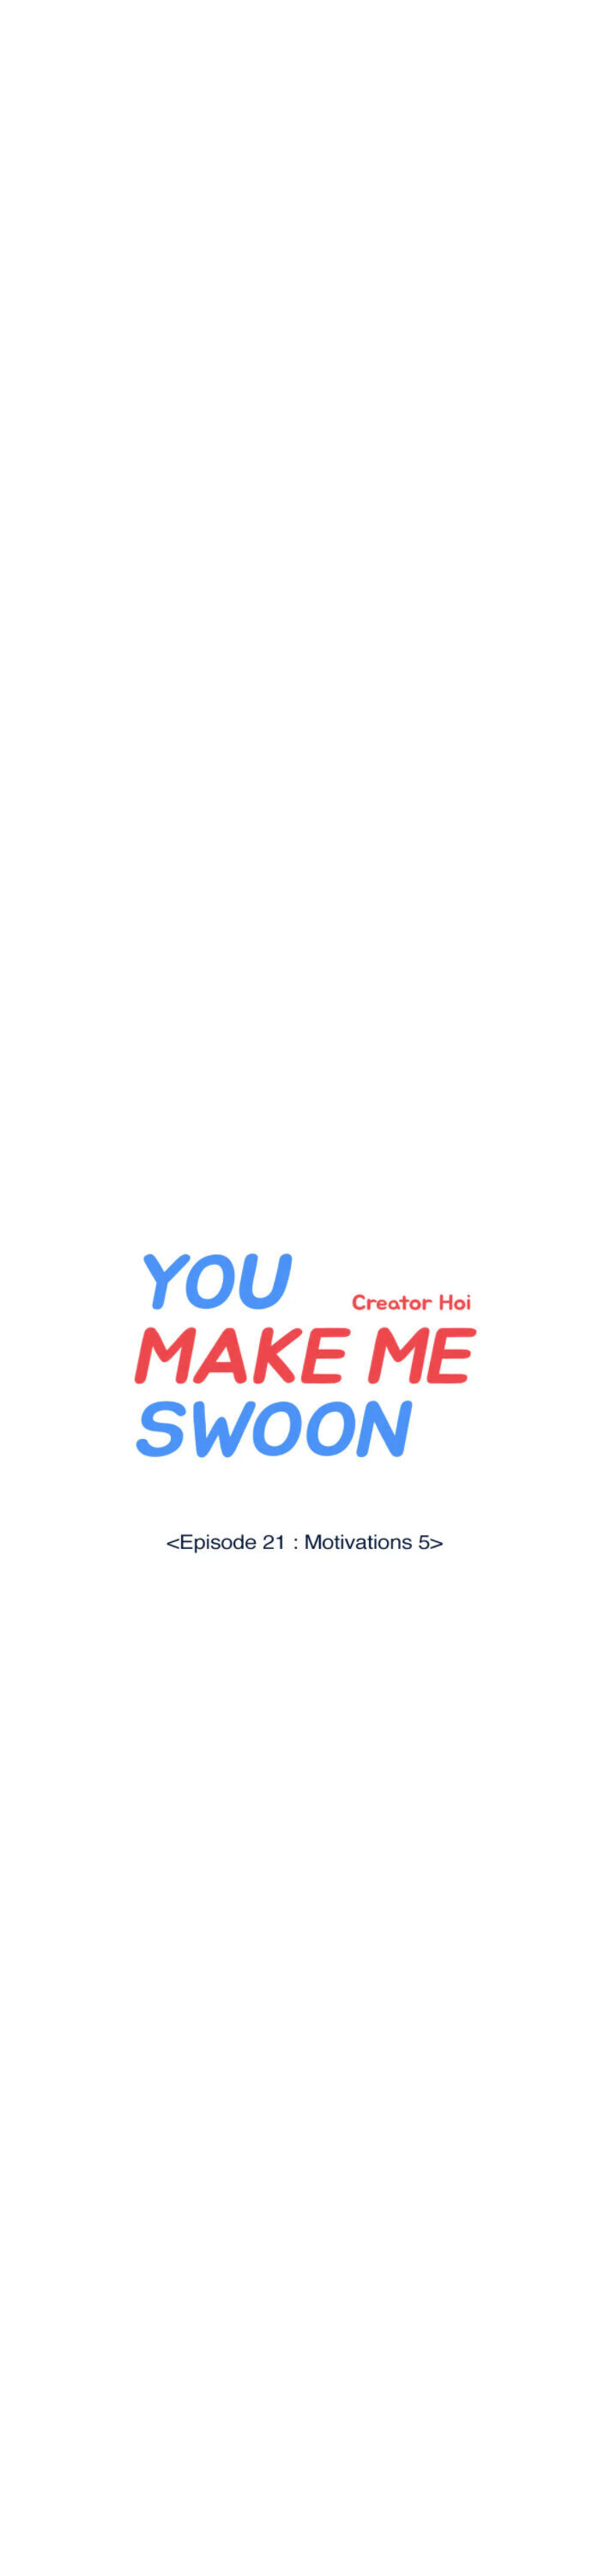 You Make Me Swoon - Page 3